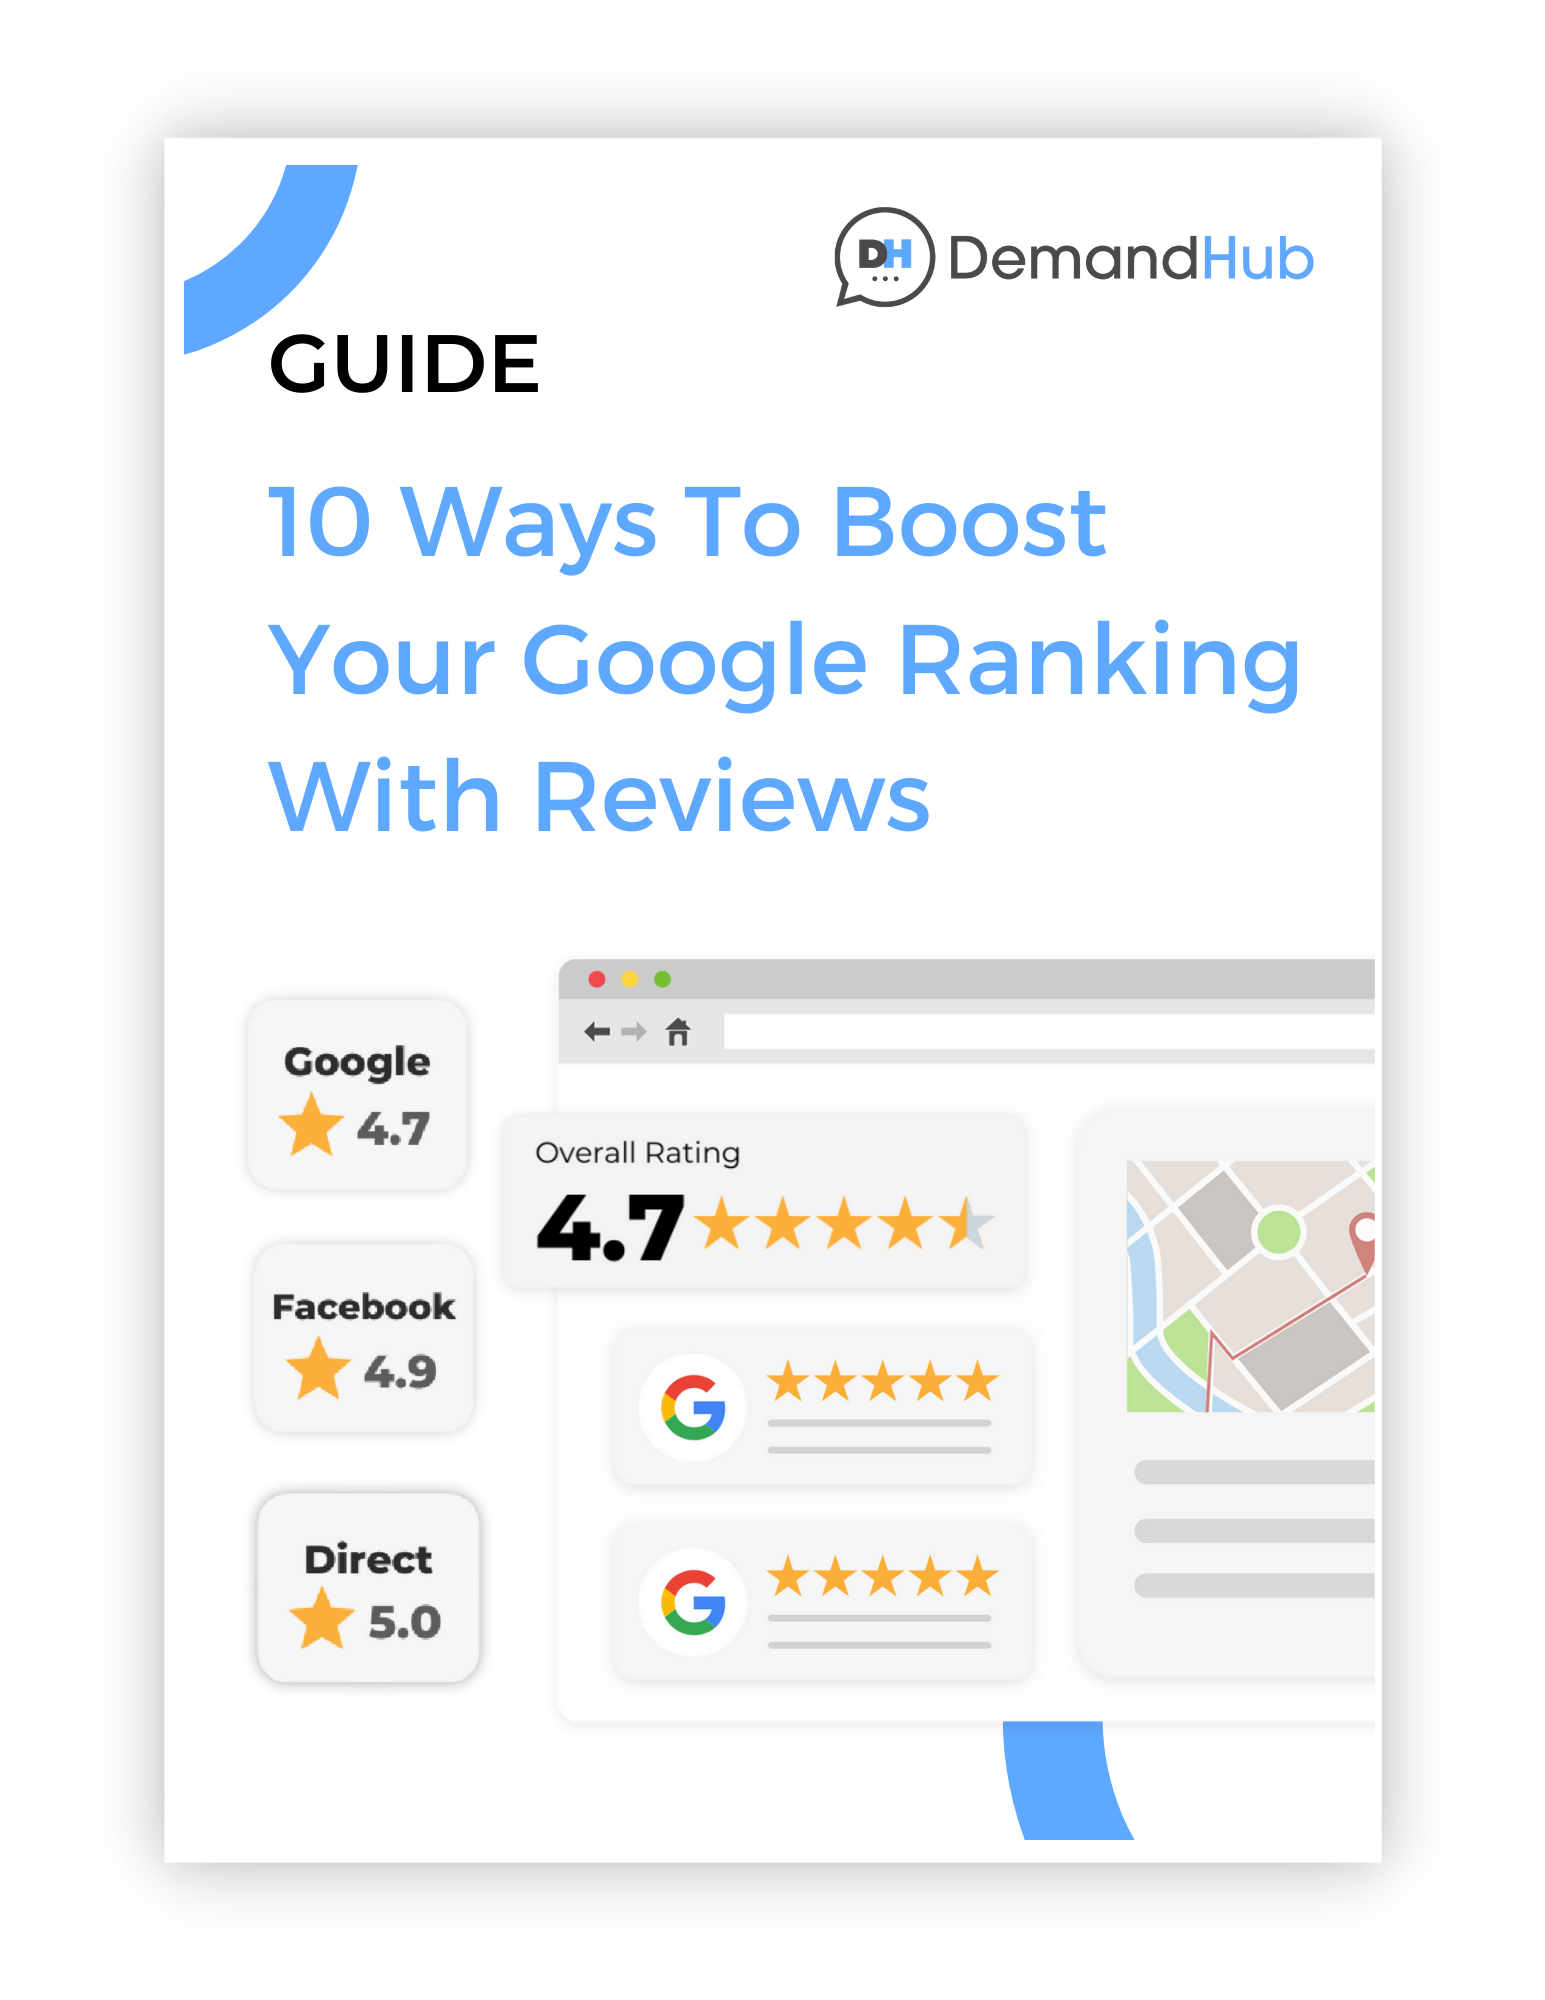 10 ways to get more online reviews and boost your google ranking